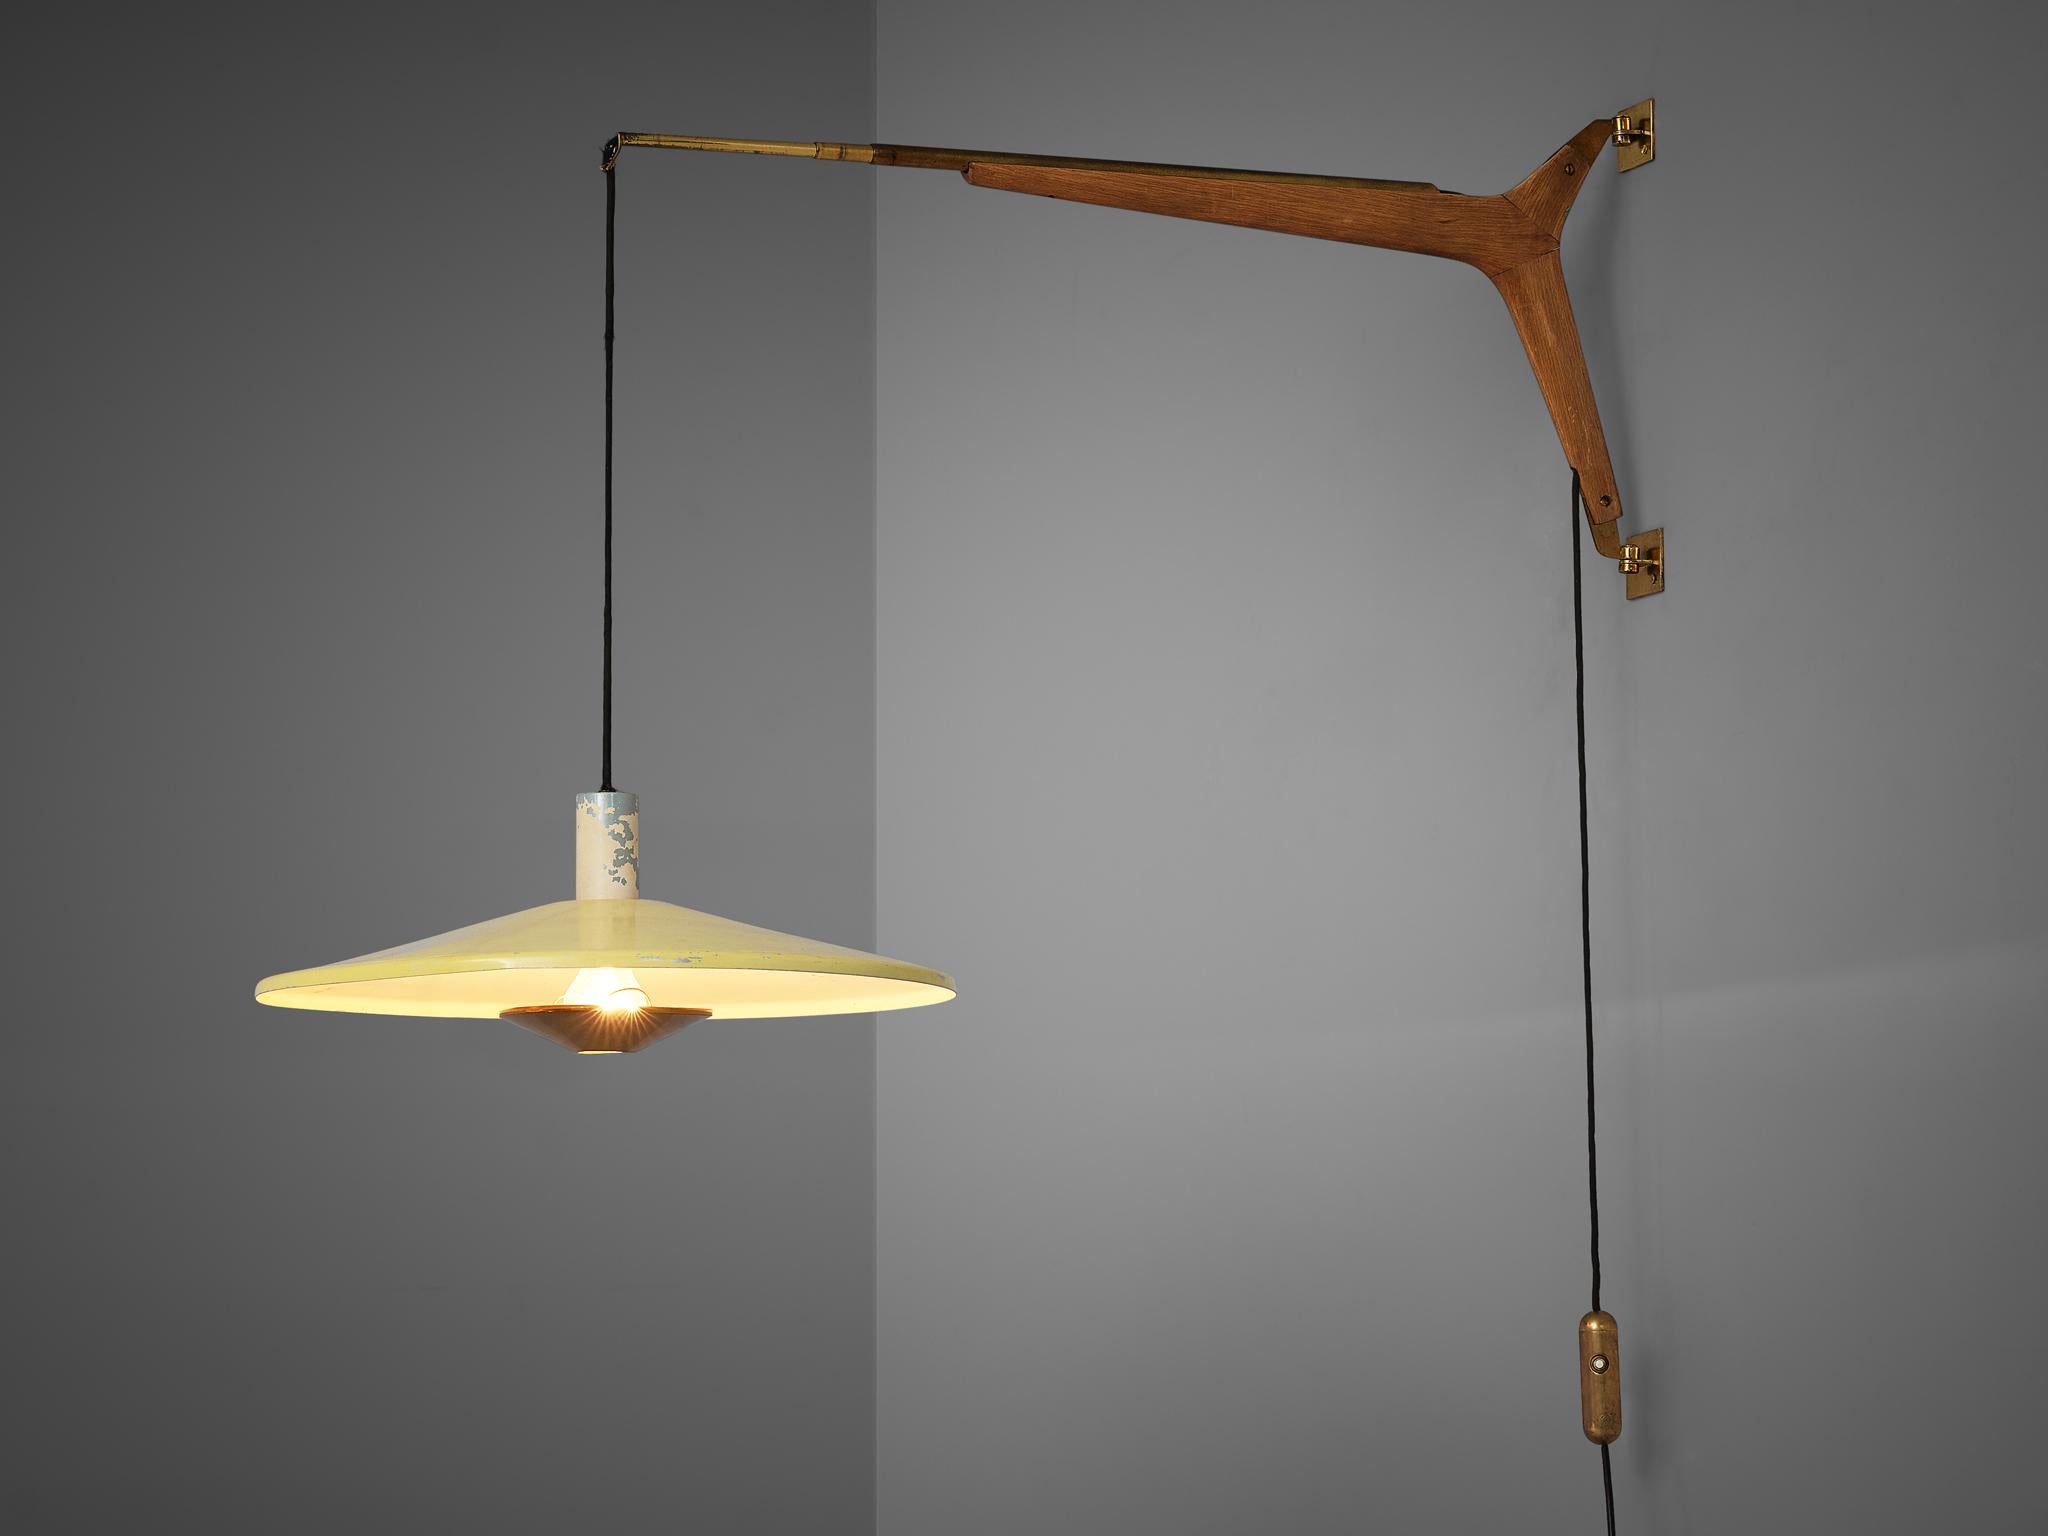 Wall light, cream and yellow lacquered metal, brass, oak, cloth covered wiring, Italy, 1960s

This ceiling lamp is an excellent example of the 'new style' Italian lighting designs of the 1950s and 1960s. Its soft yellow shade contrast with the